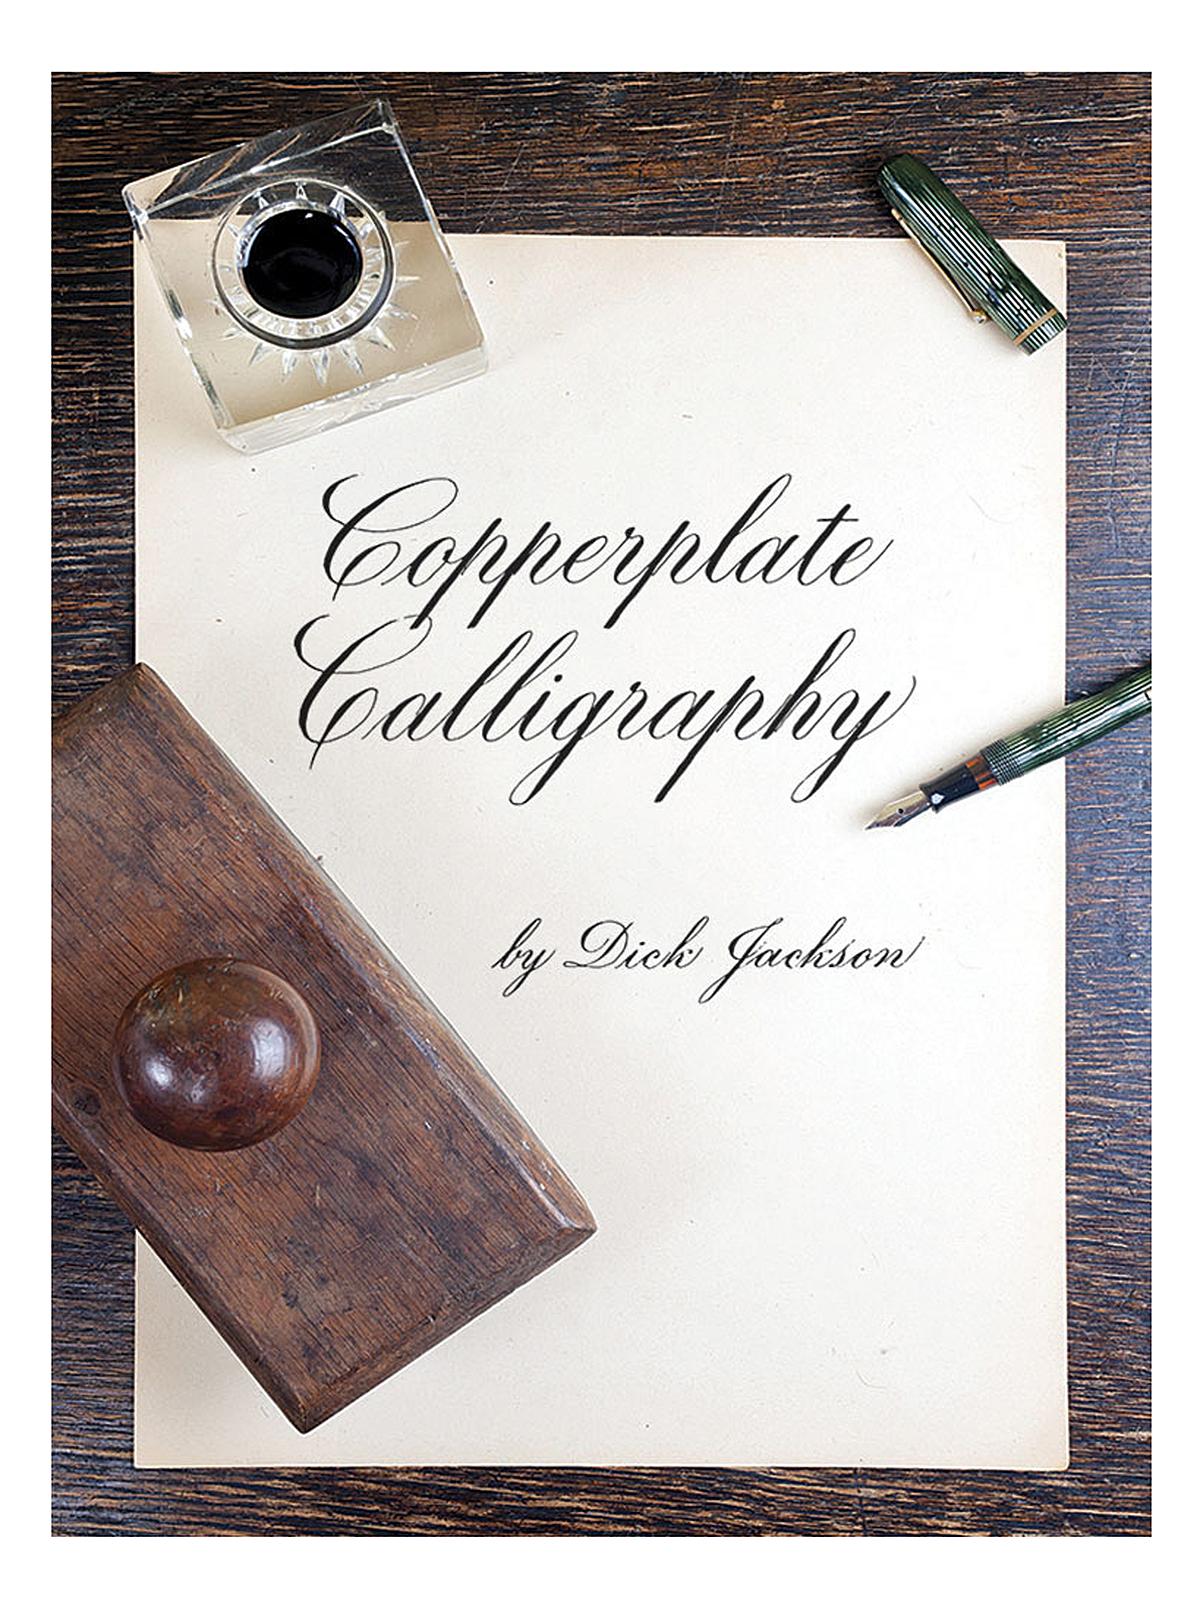 Copperplate Calligraphy Each